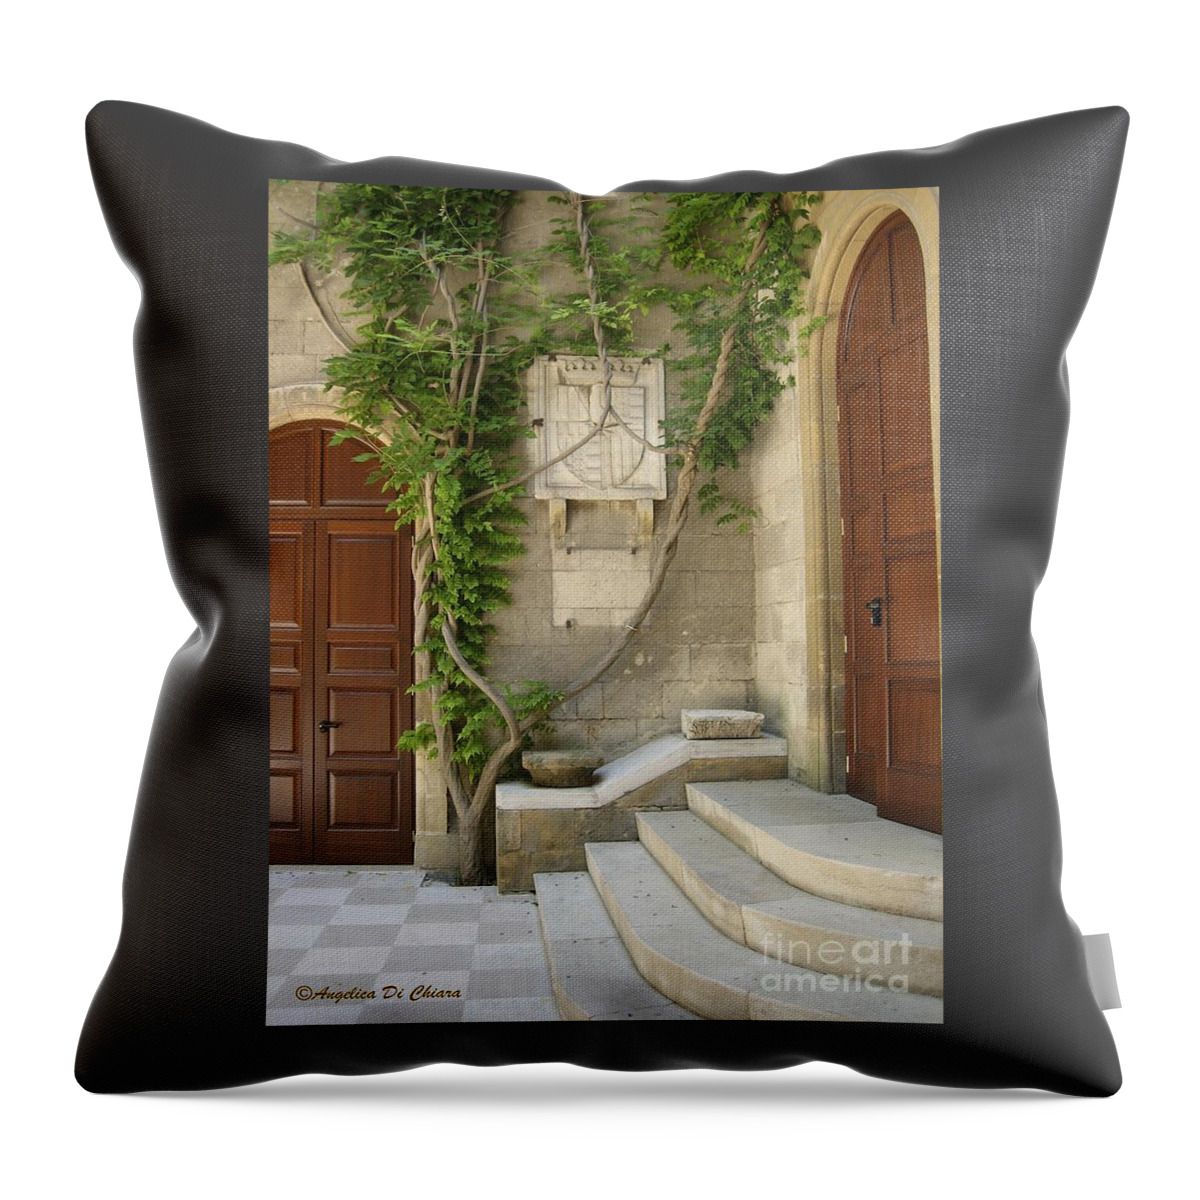 Cityscape Throw Pillow featuring the photograph Italian Courtyard- Brindisi by Italian Art